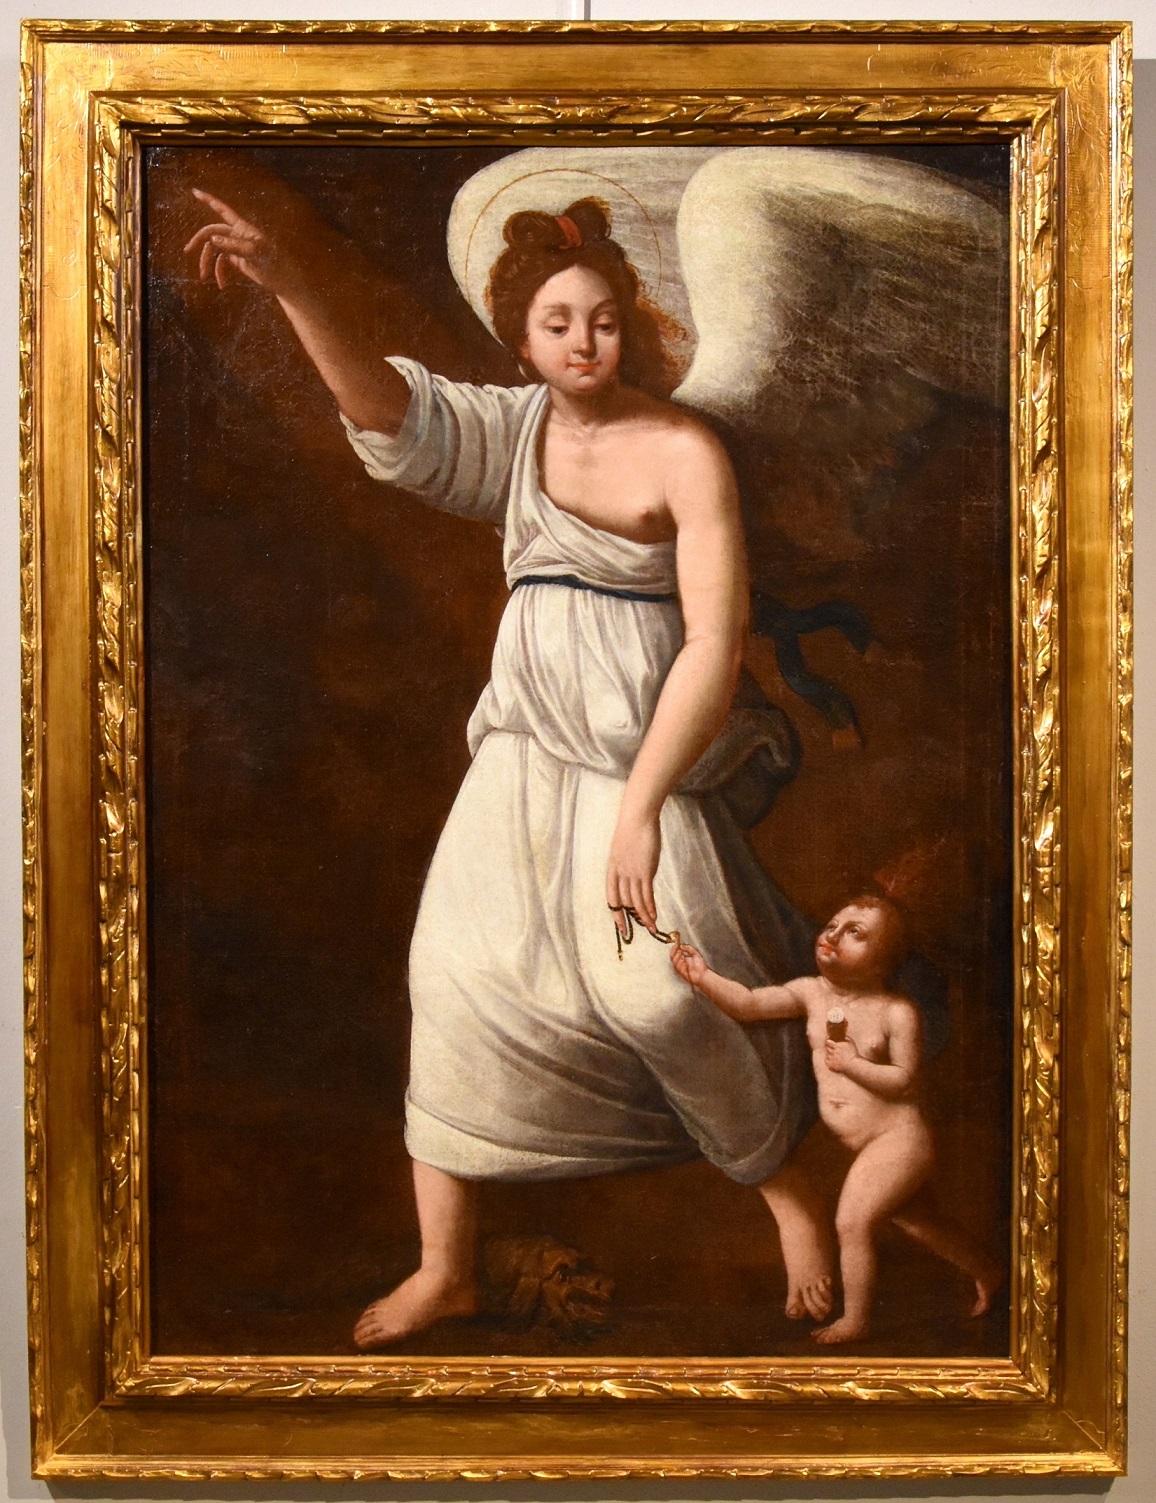 Guardian Angel Gramatica Paint Oil on canvas Old master 17th Century Religious - Painting by Antiveduto Gramatica (Siena, 1571 - Rome, 1626)